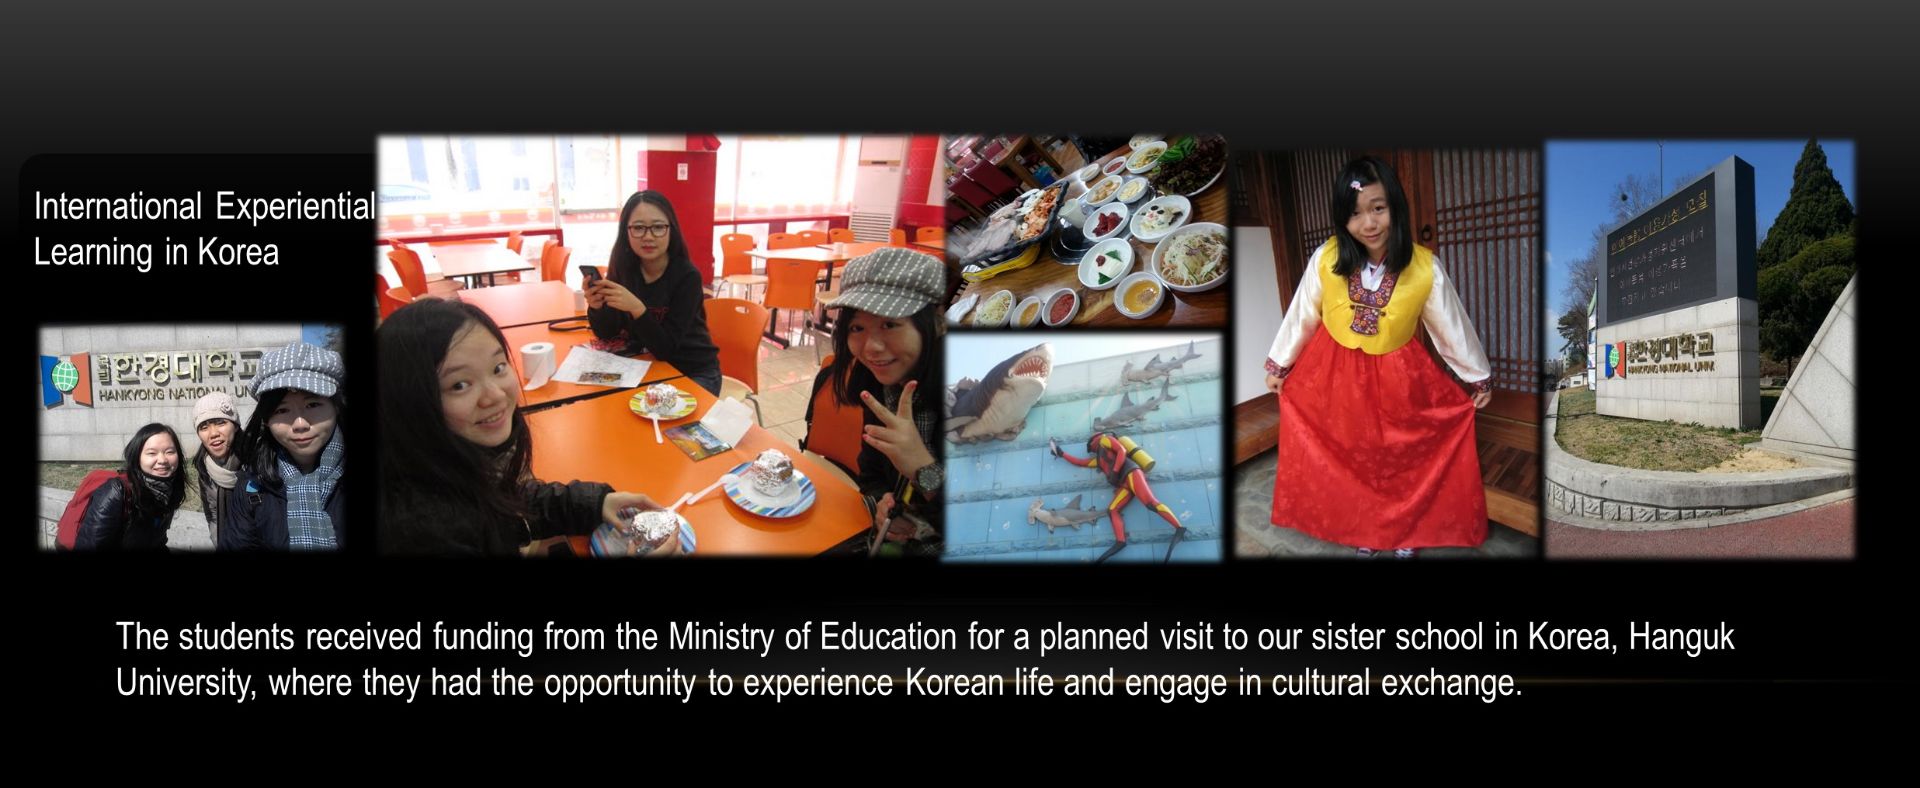 International Experiential Learning in Korea